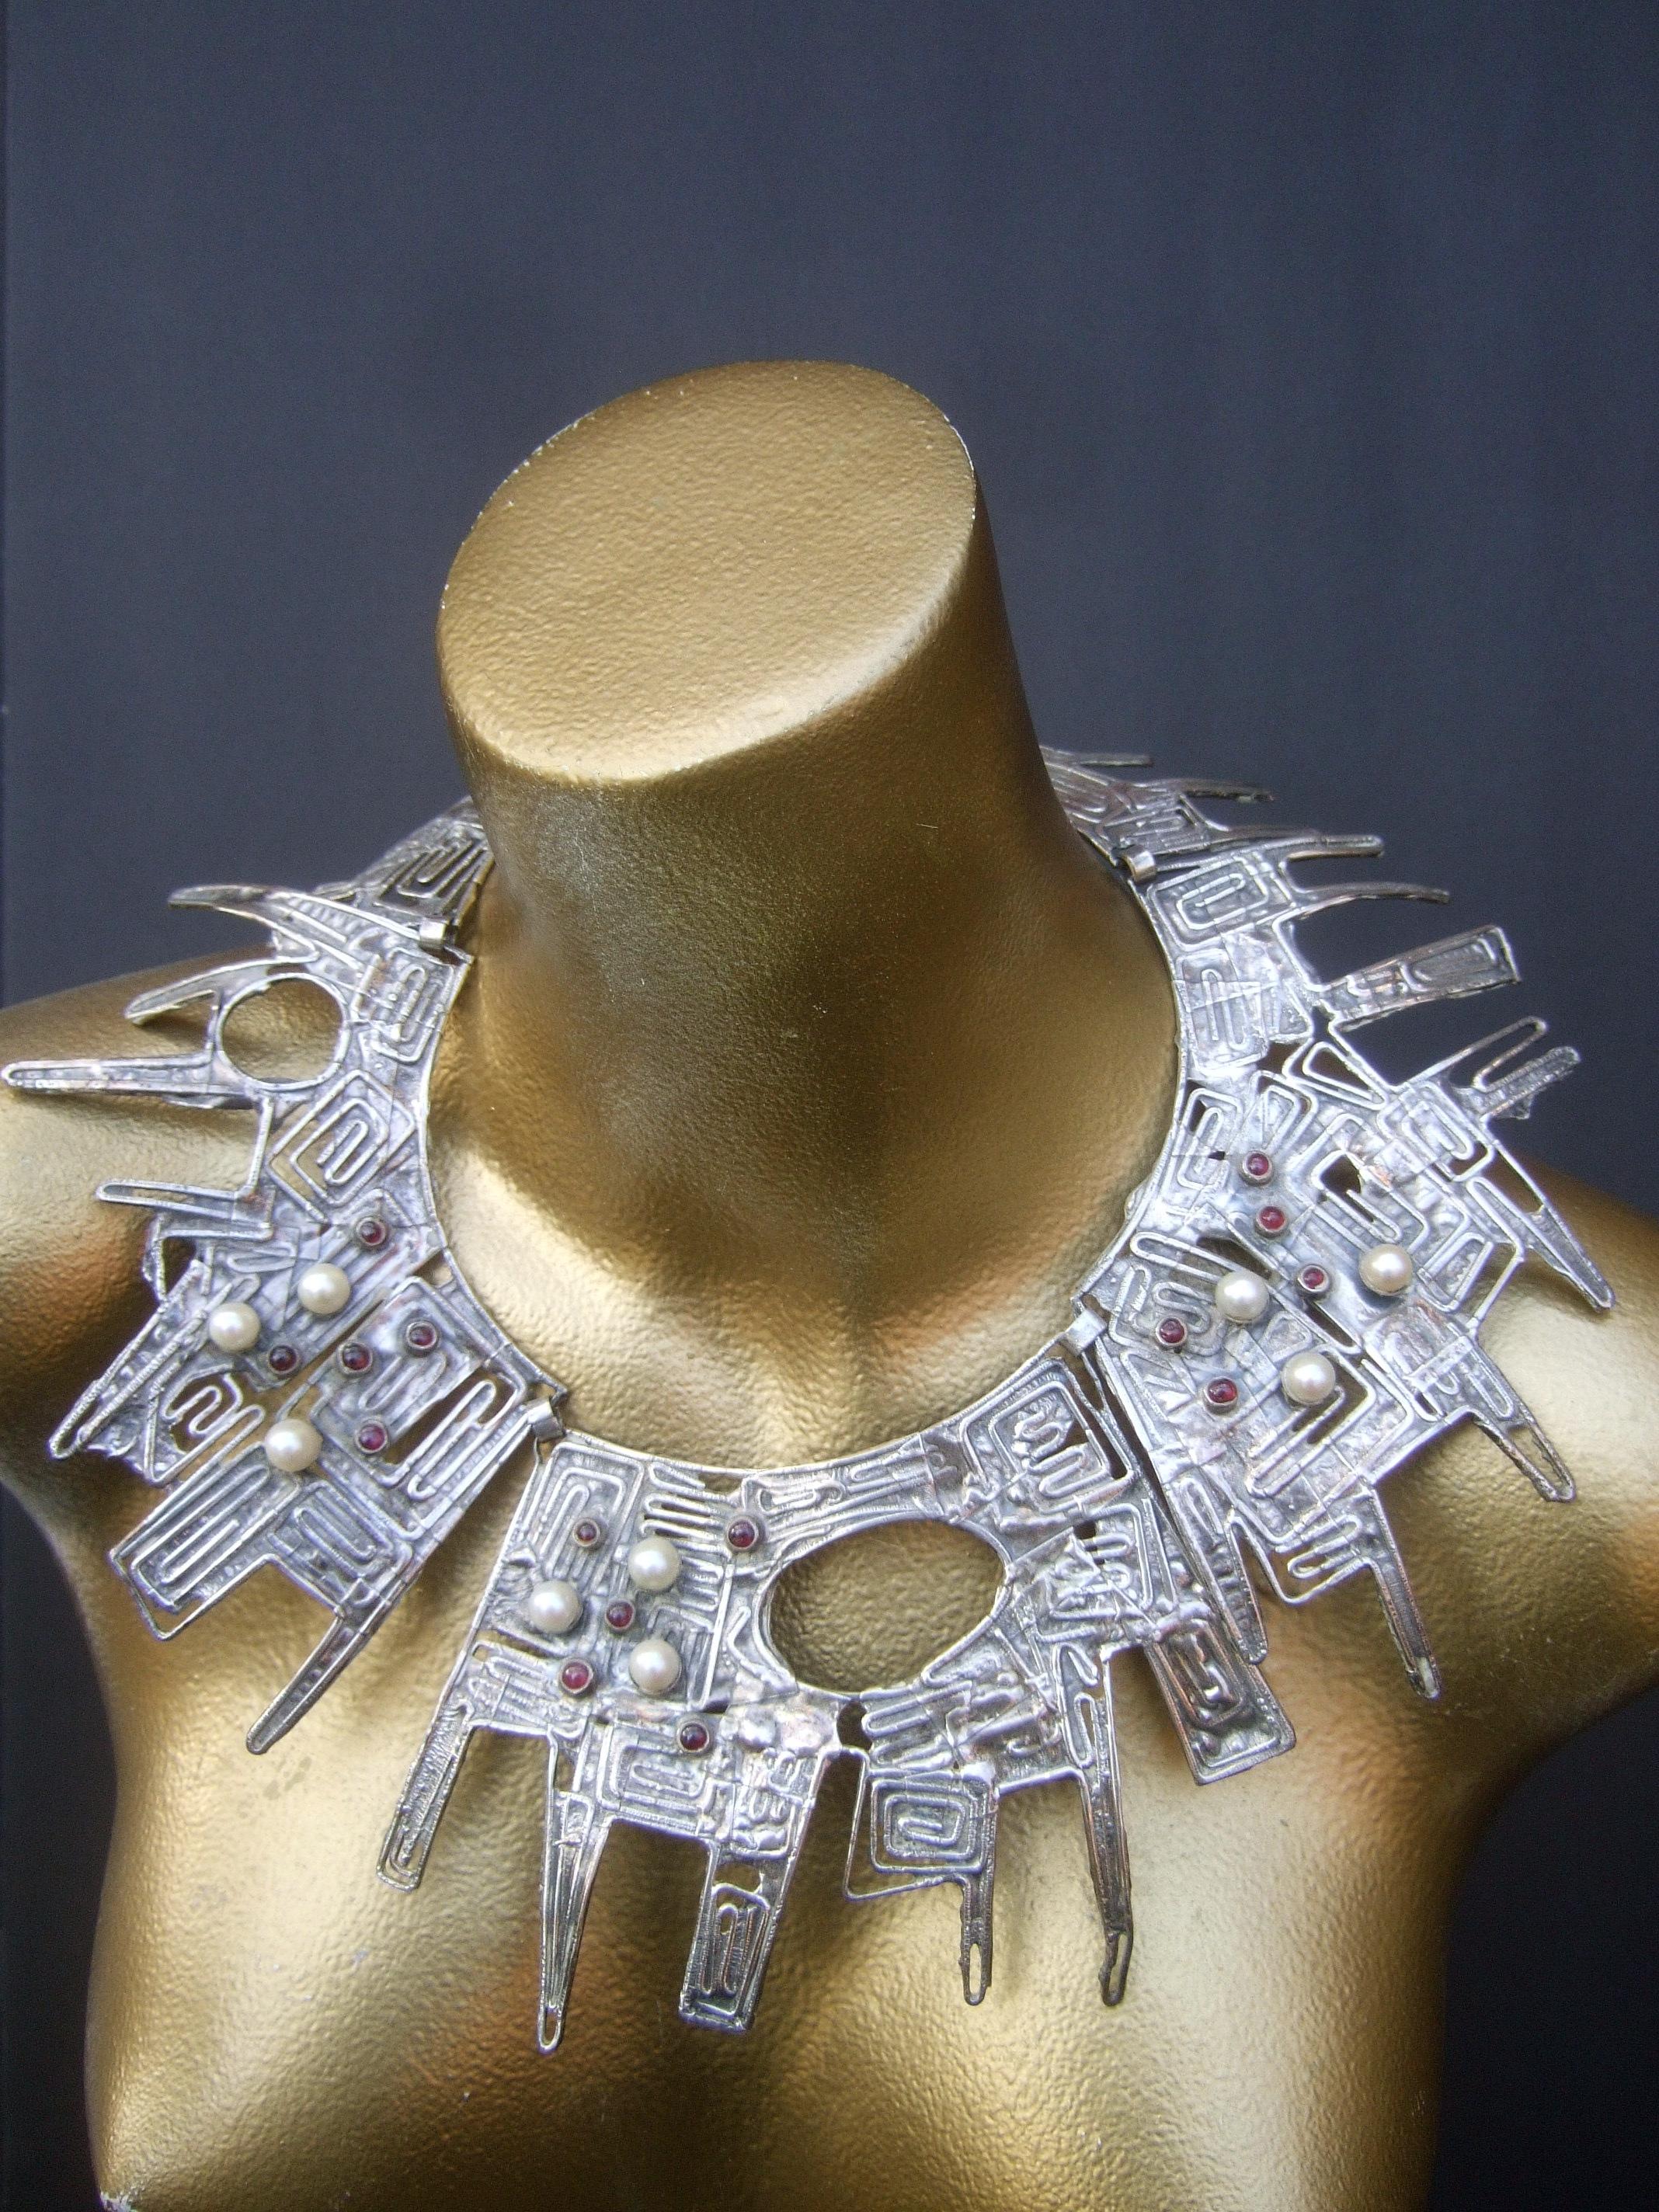 Massive avant-garde sterling silver brutalist statement necklace designed by Rachel Gera c 1970s

The incredible mind-boggling massive scale sterling silver artisan necklace is comprised of three huge scale sterling silver brutalist hinged panels;